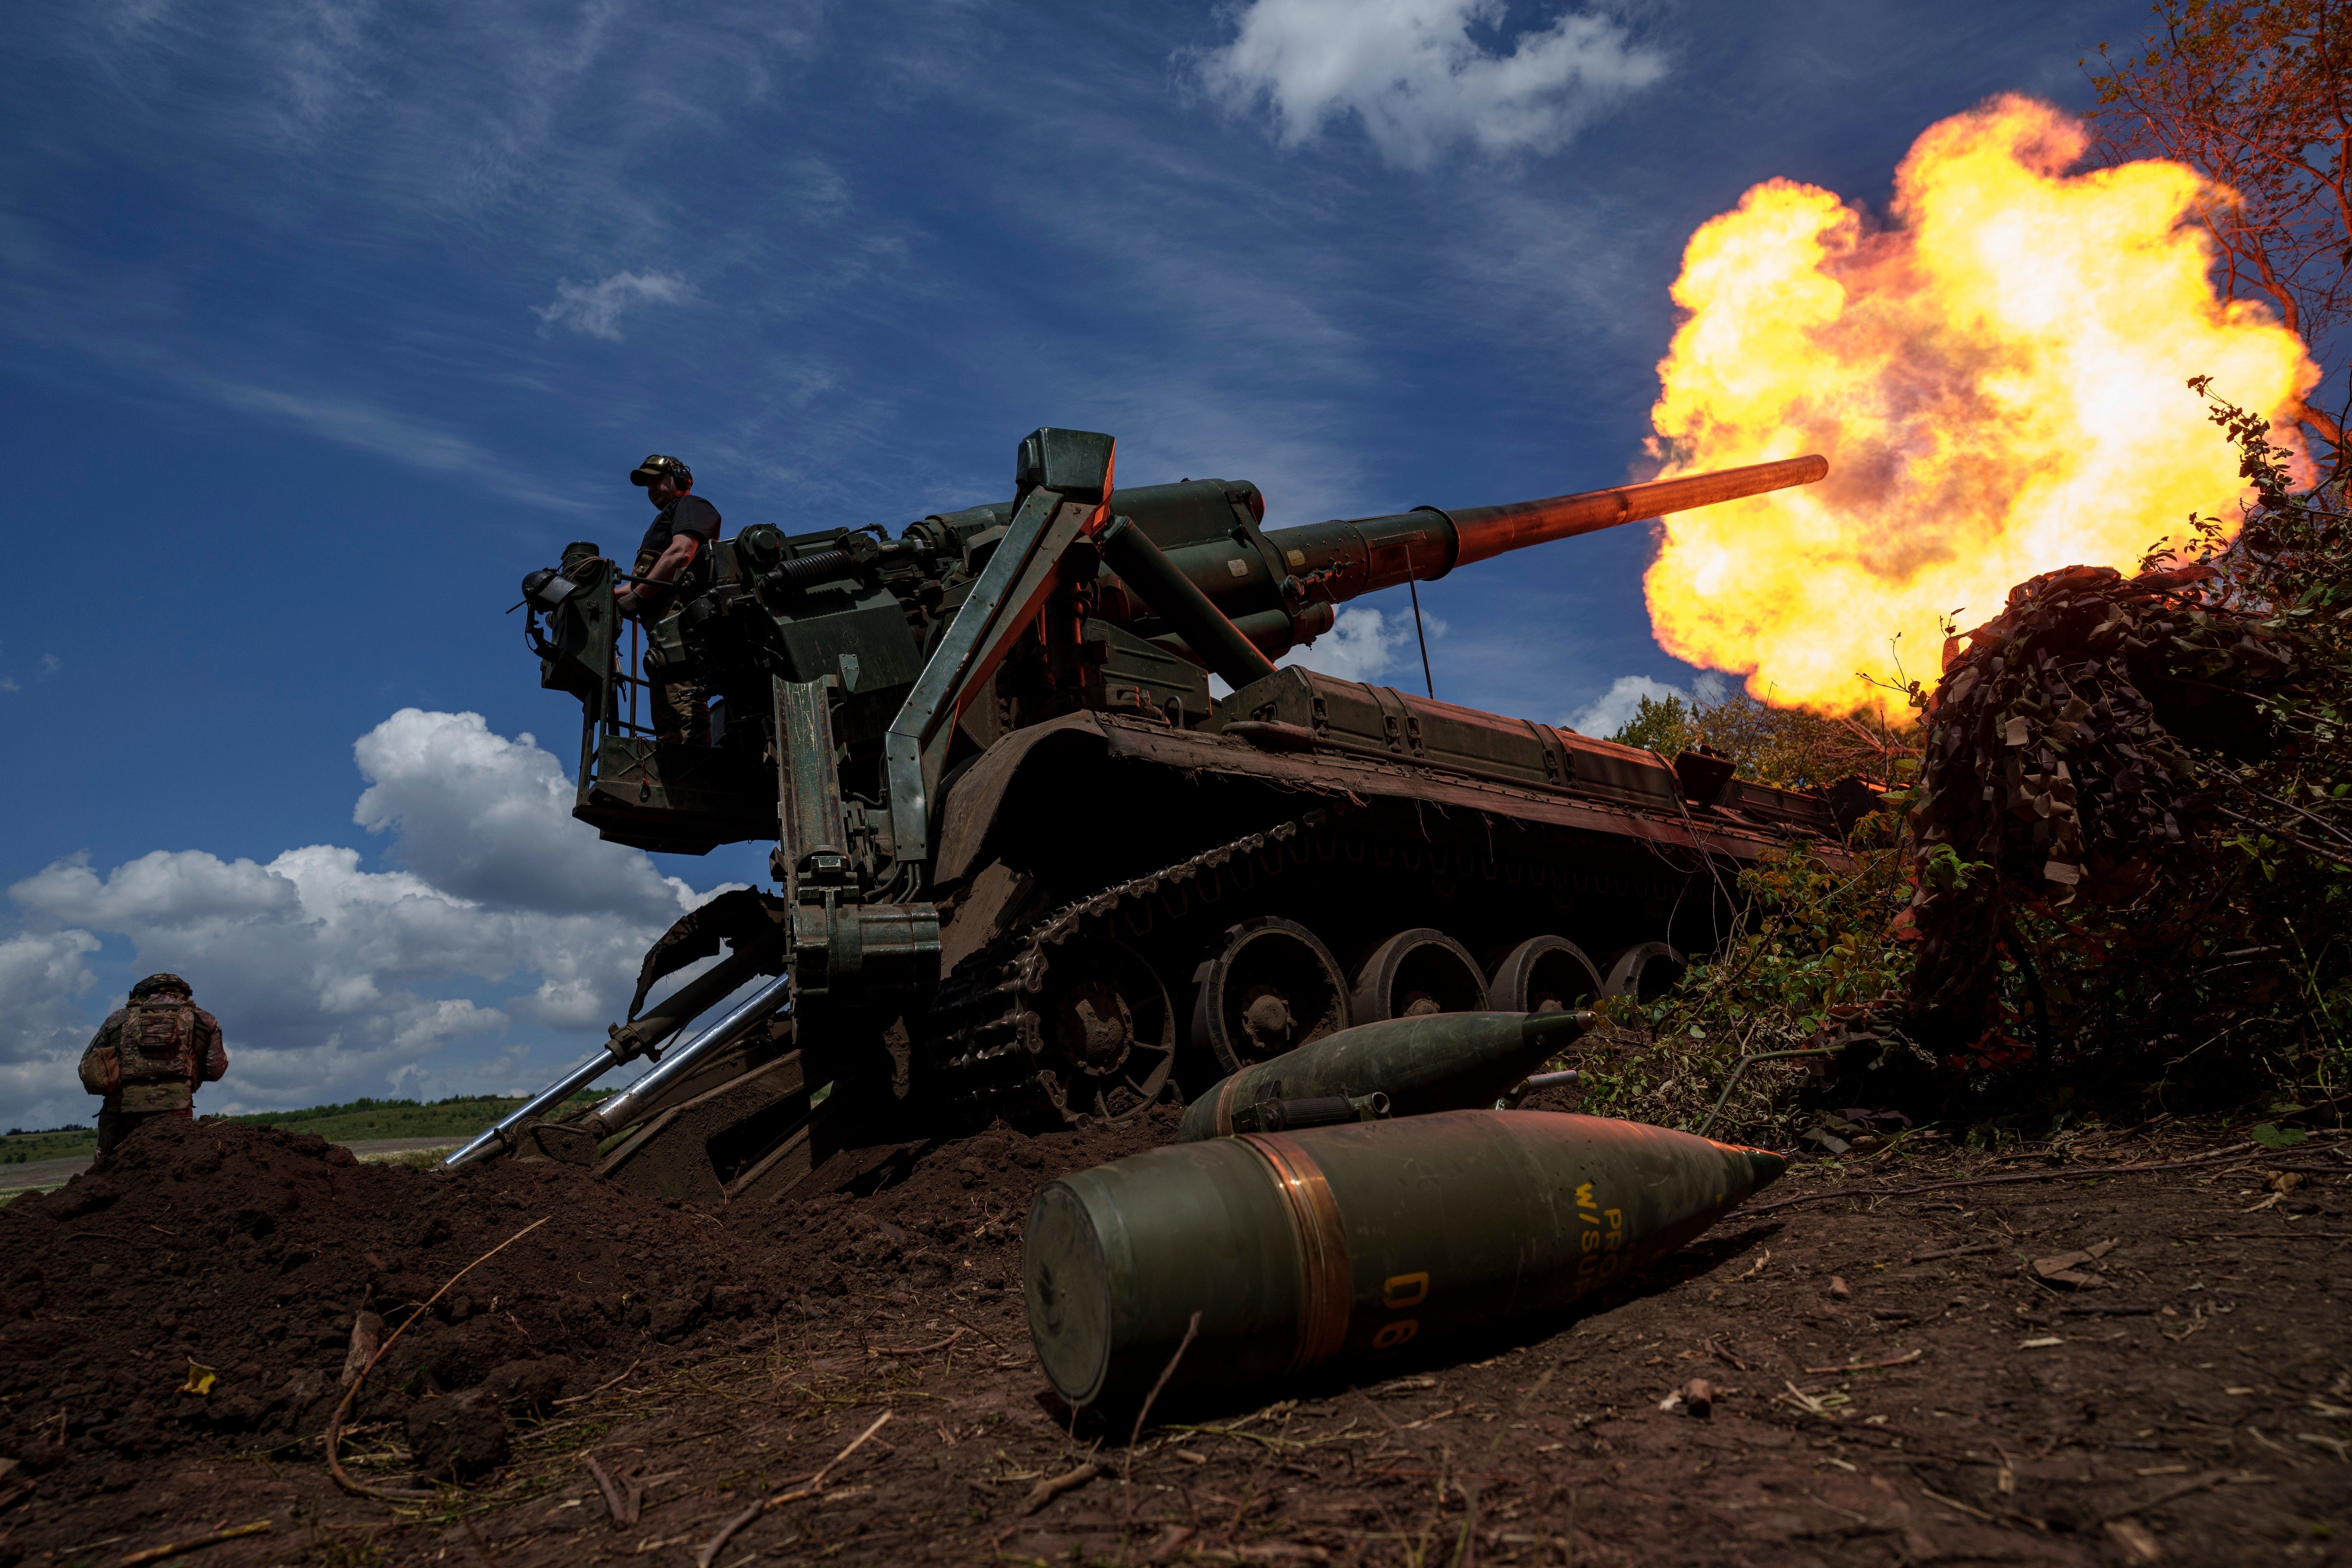 Ukrainian soldiers fire on Russian positions along the front line in the Donetsk region of Ukraine